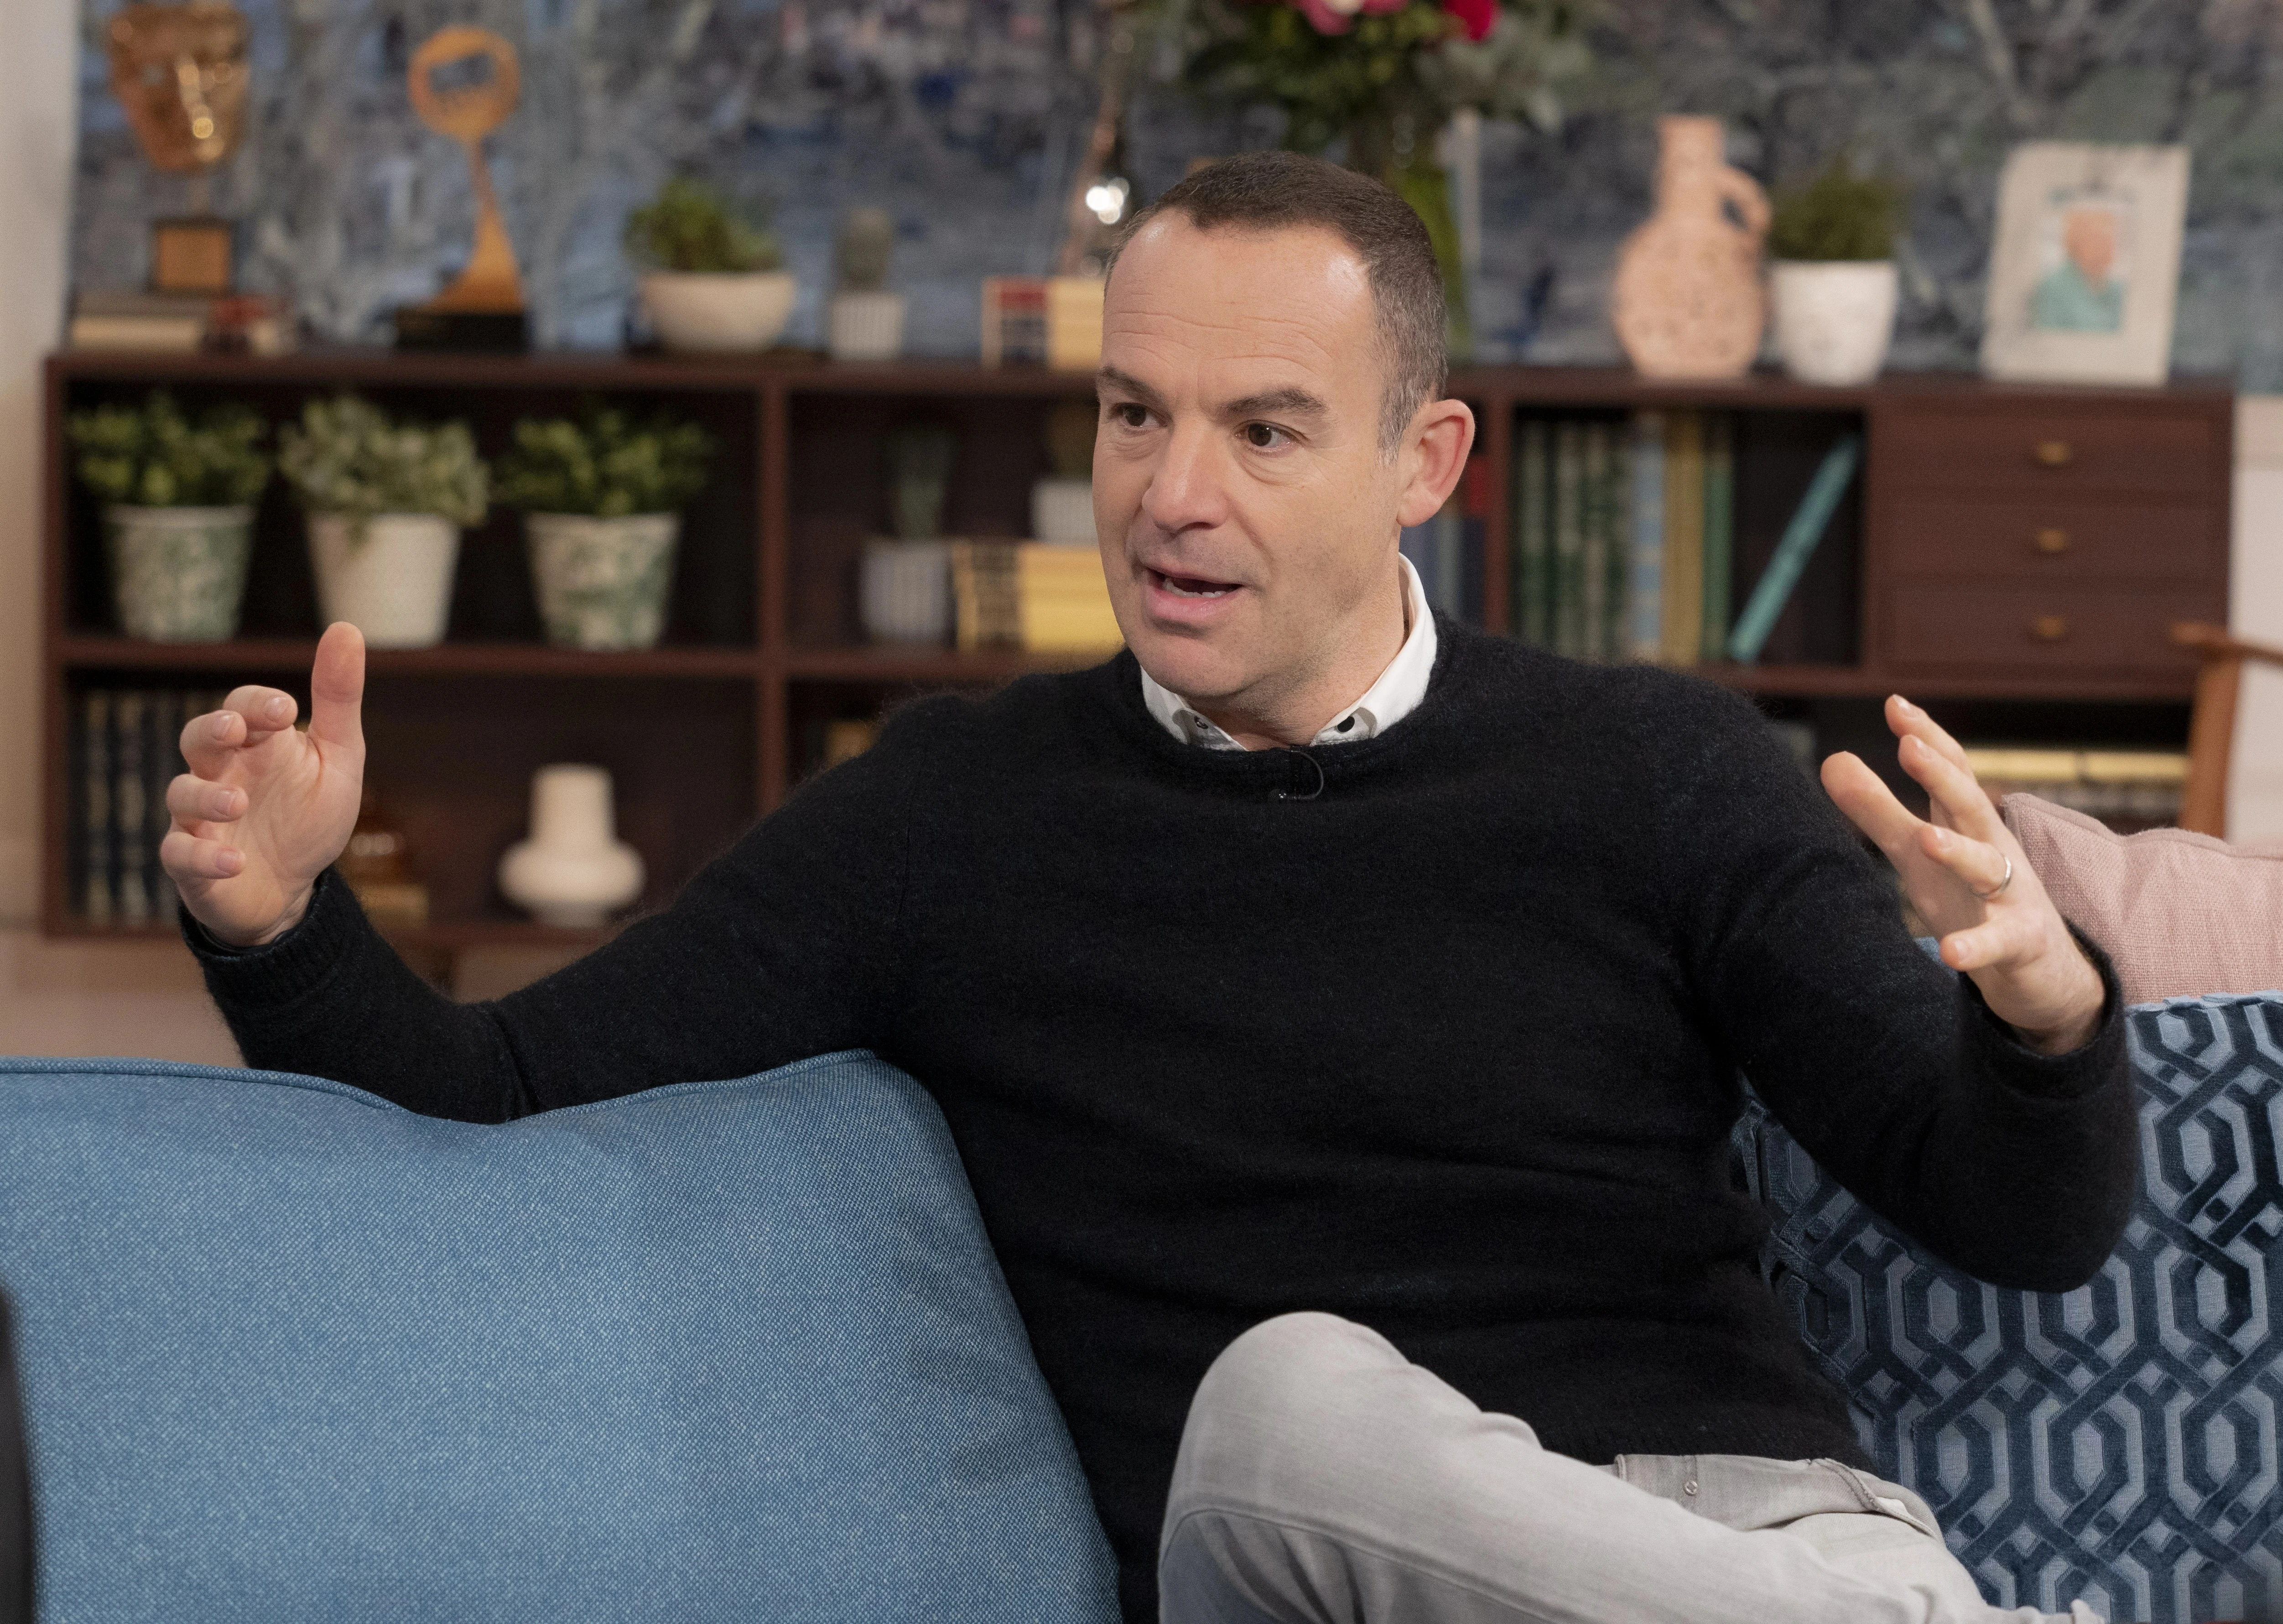 Martin Lewis slams BBC amid cost of living crisis during This Morning appearance